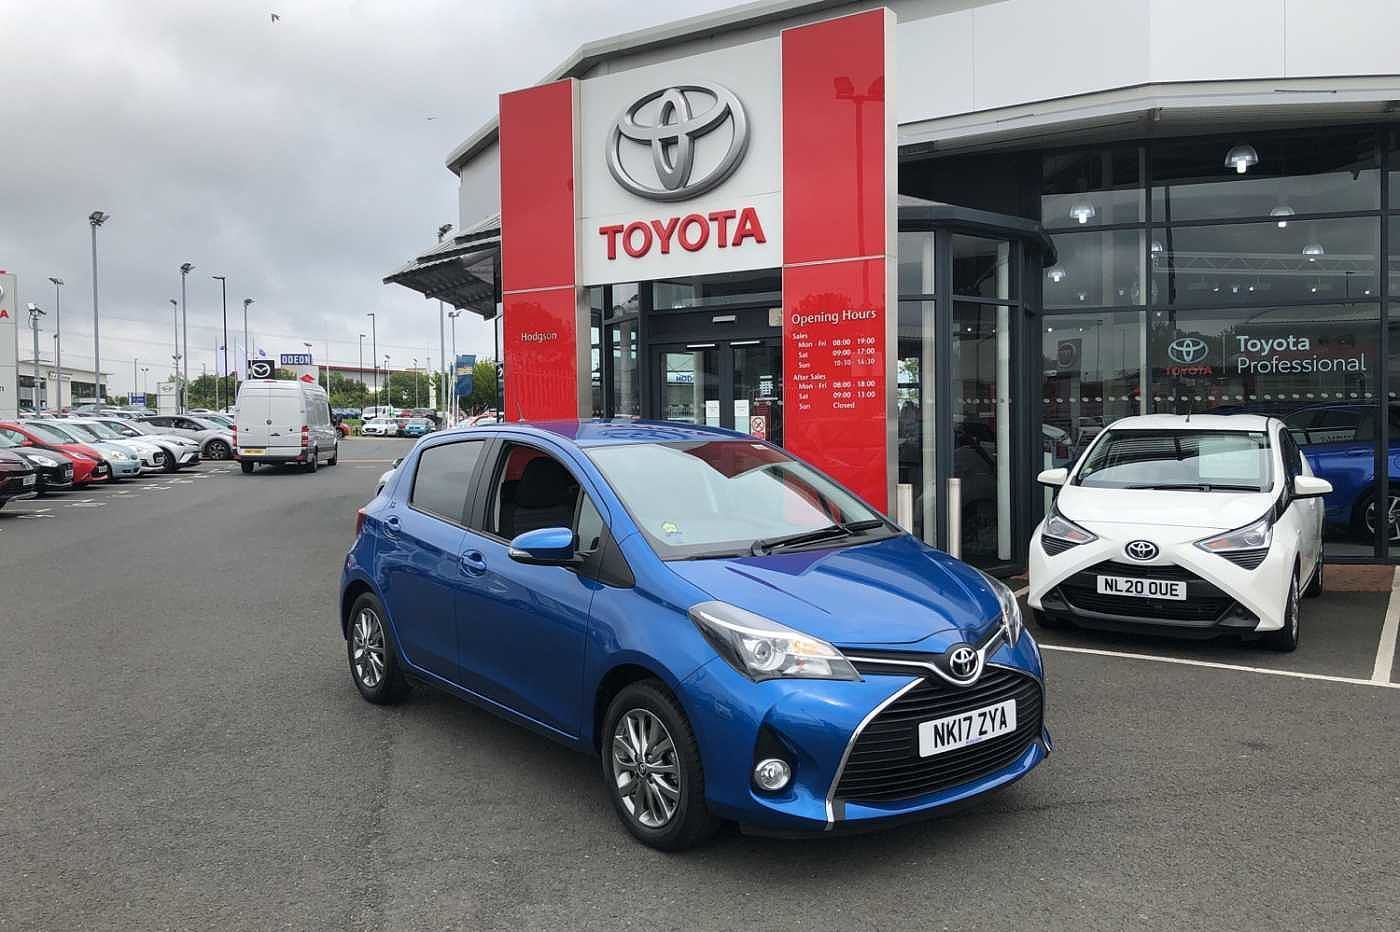 Toyota Newcastle - New & Used Cars and Servicing